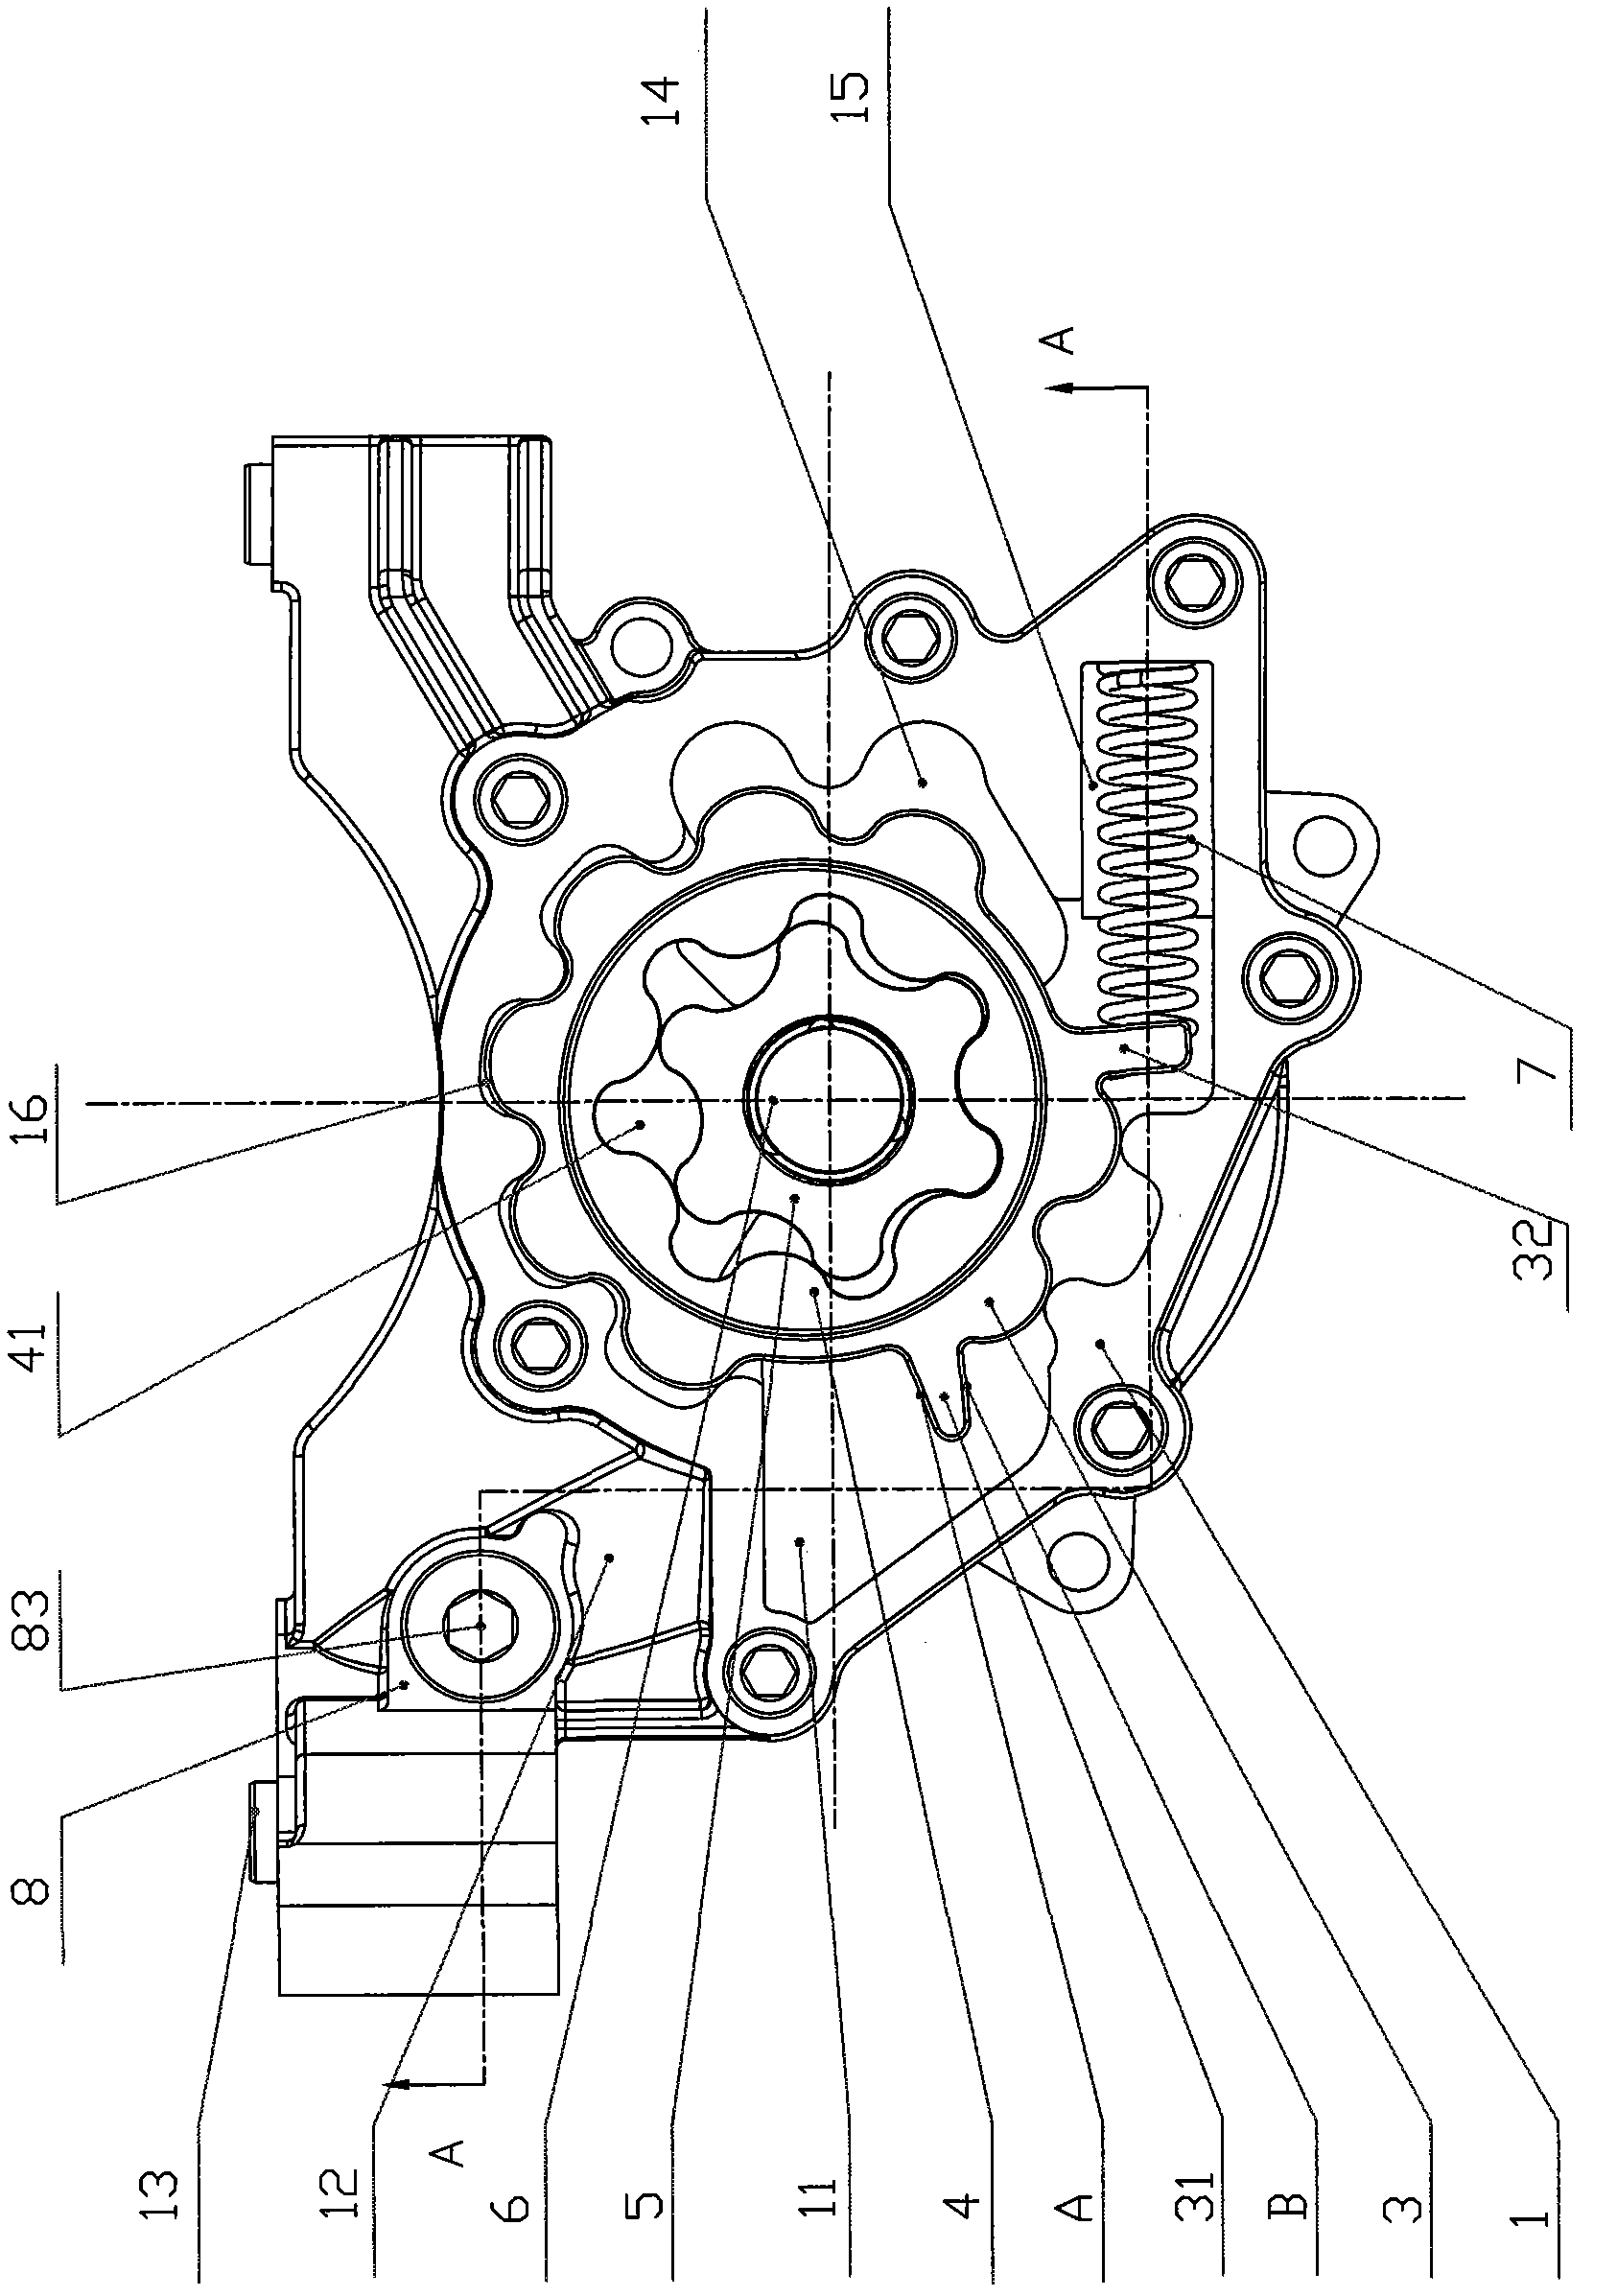 Variable rotor oil pump regulated and controlled by wave wheel